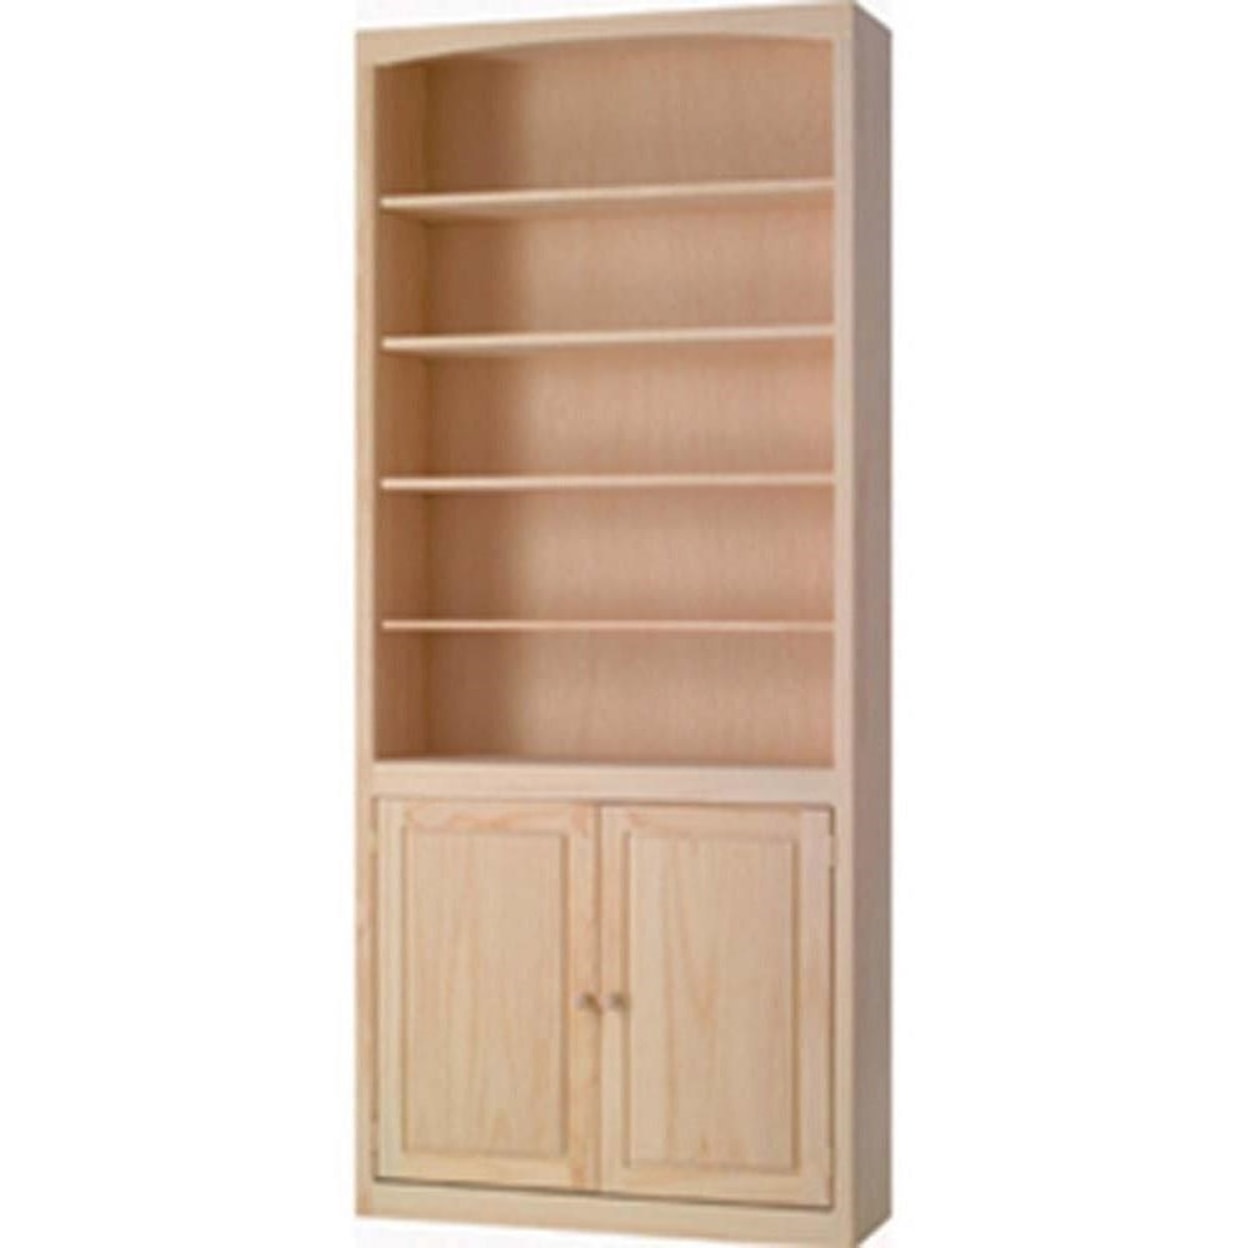 Archbold Furniture Pine Bookcases Bookcase with Doors